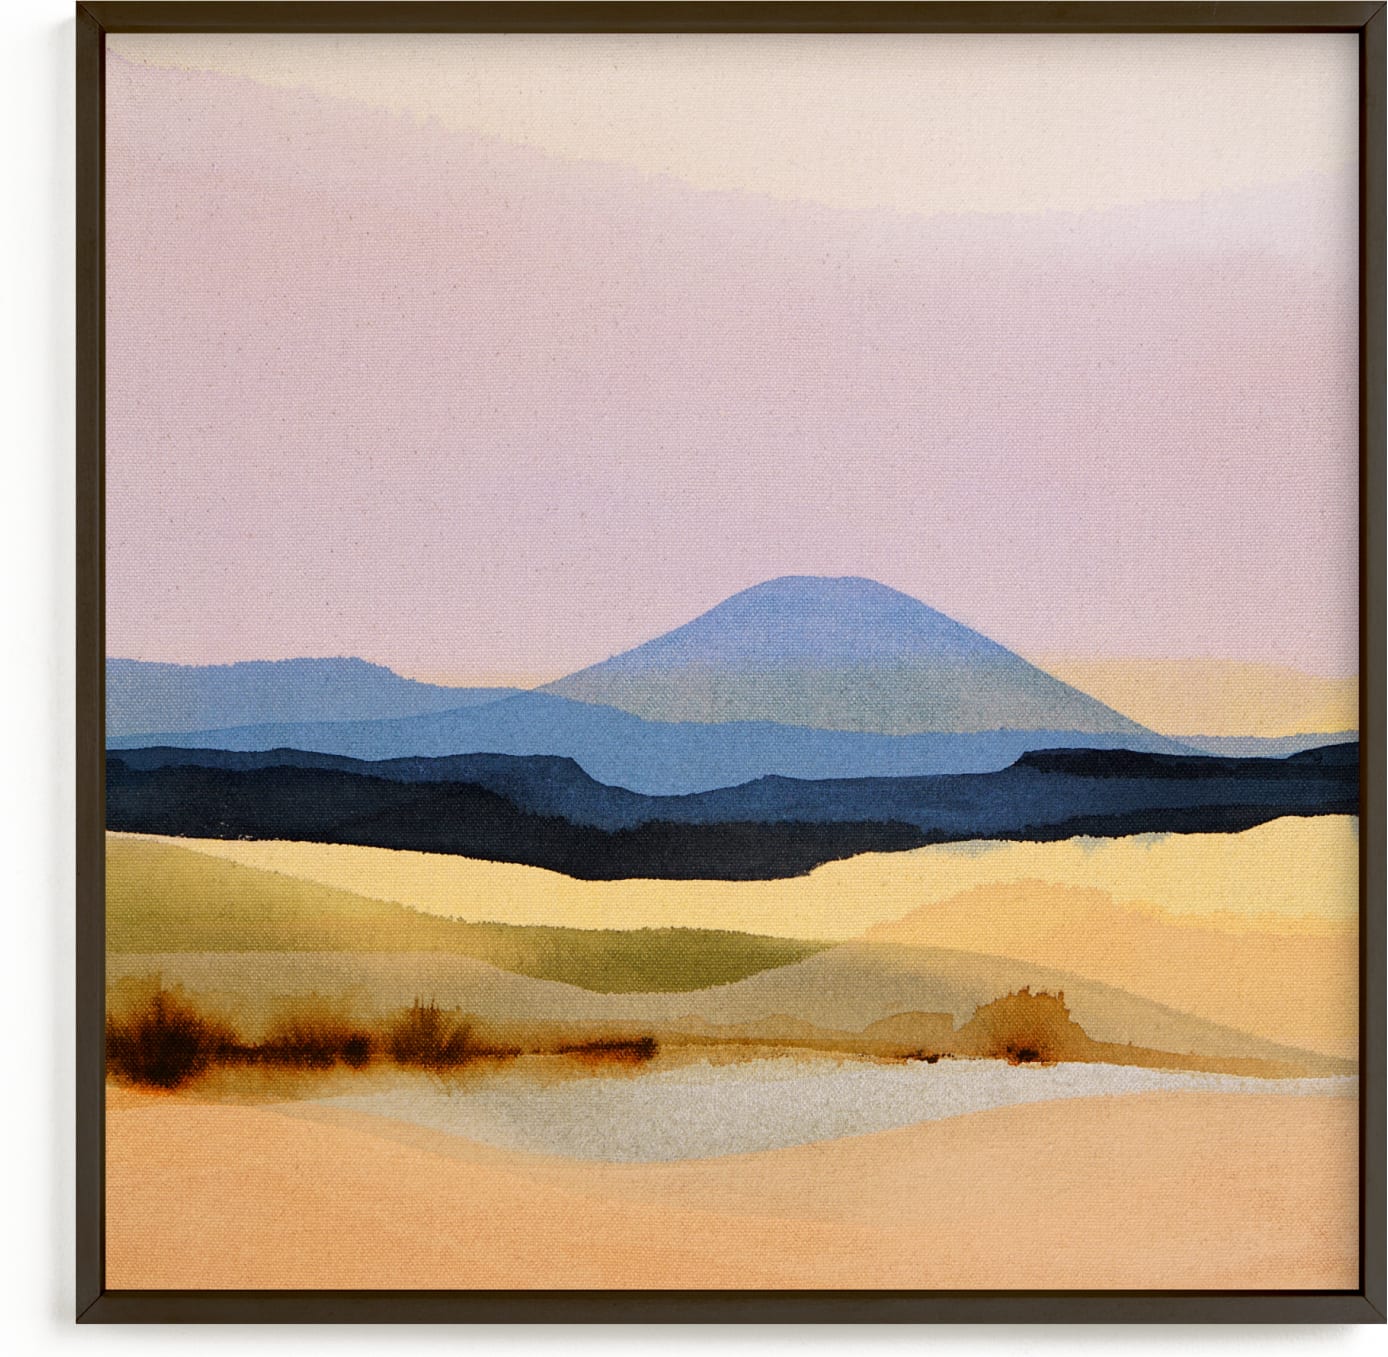 This is a brown, purple art by Shina Choi called Violet Desert Breeze.